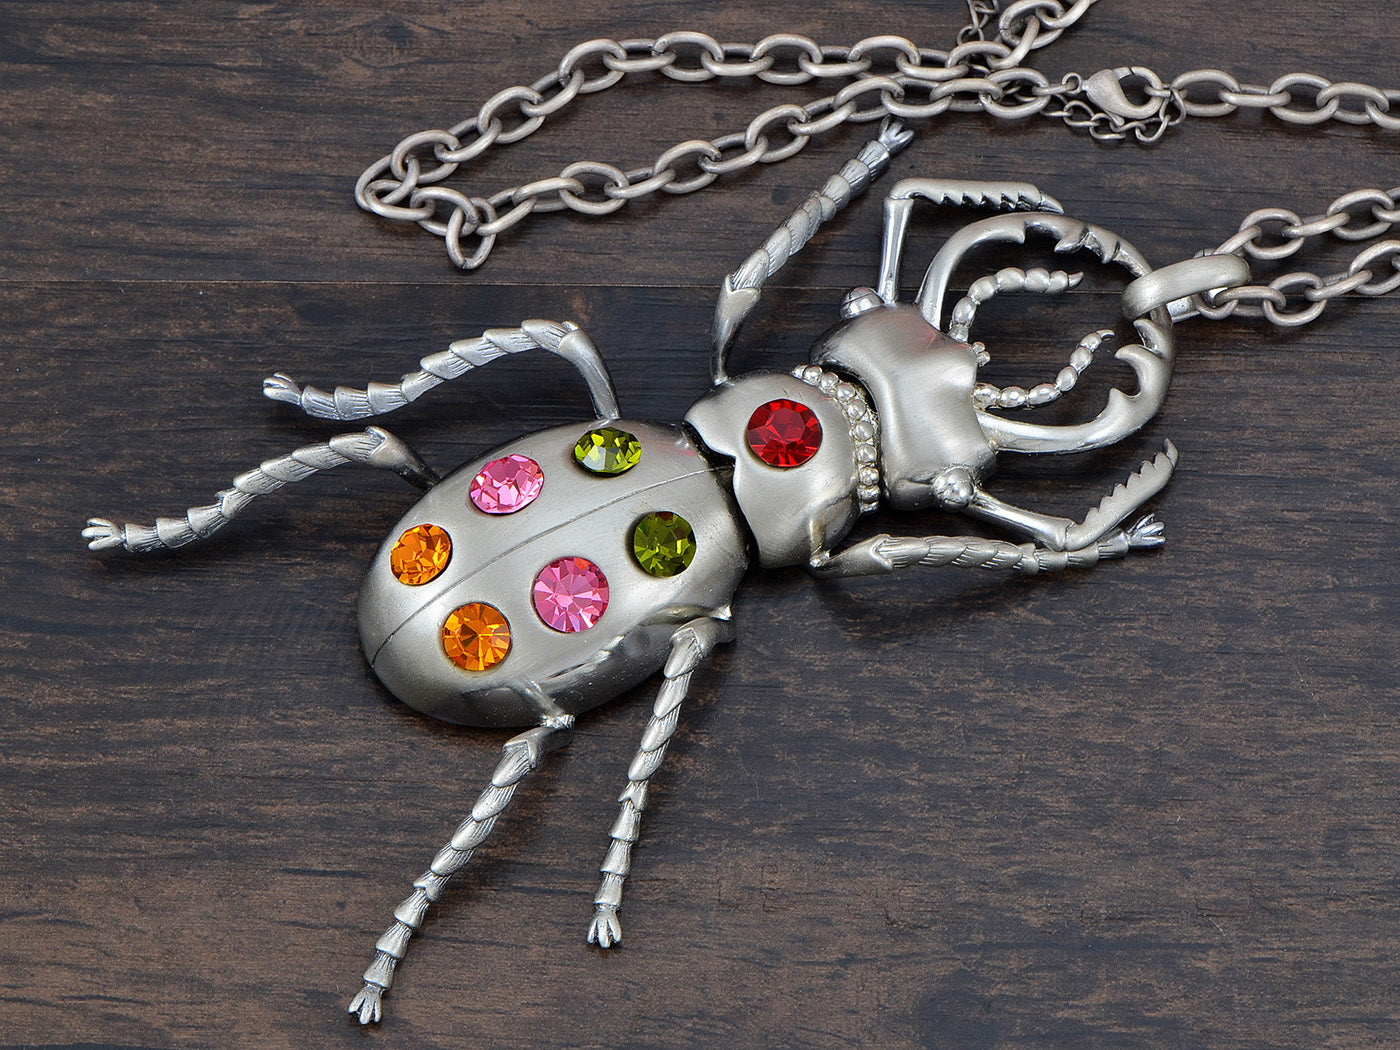 Insect Bug Necklace Pendant